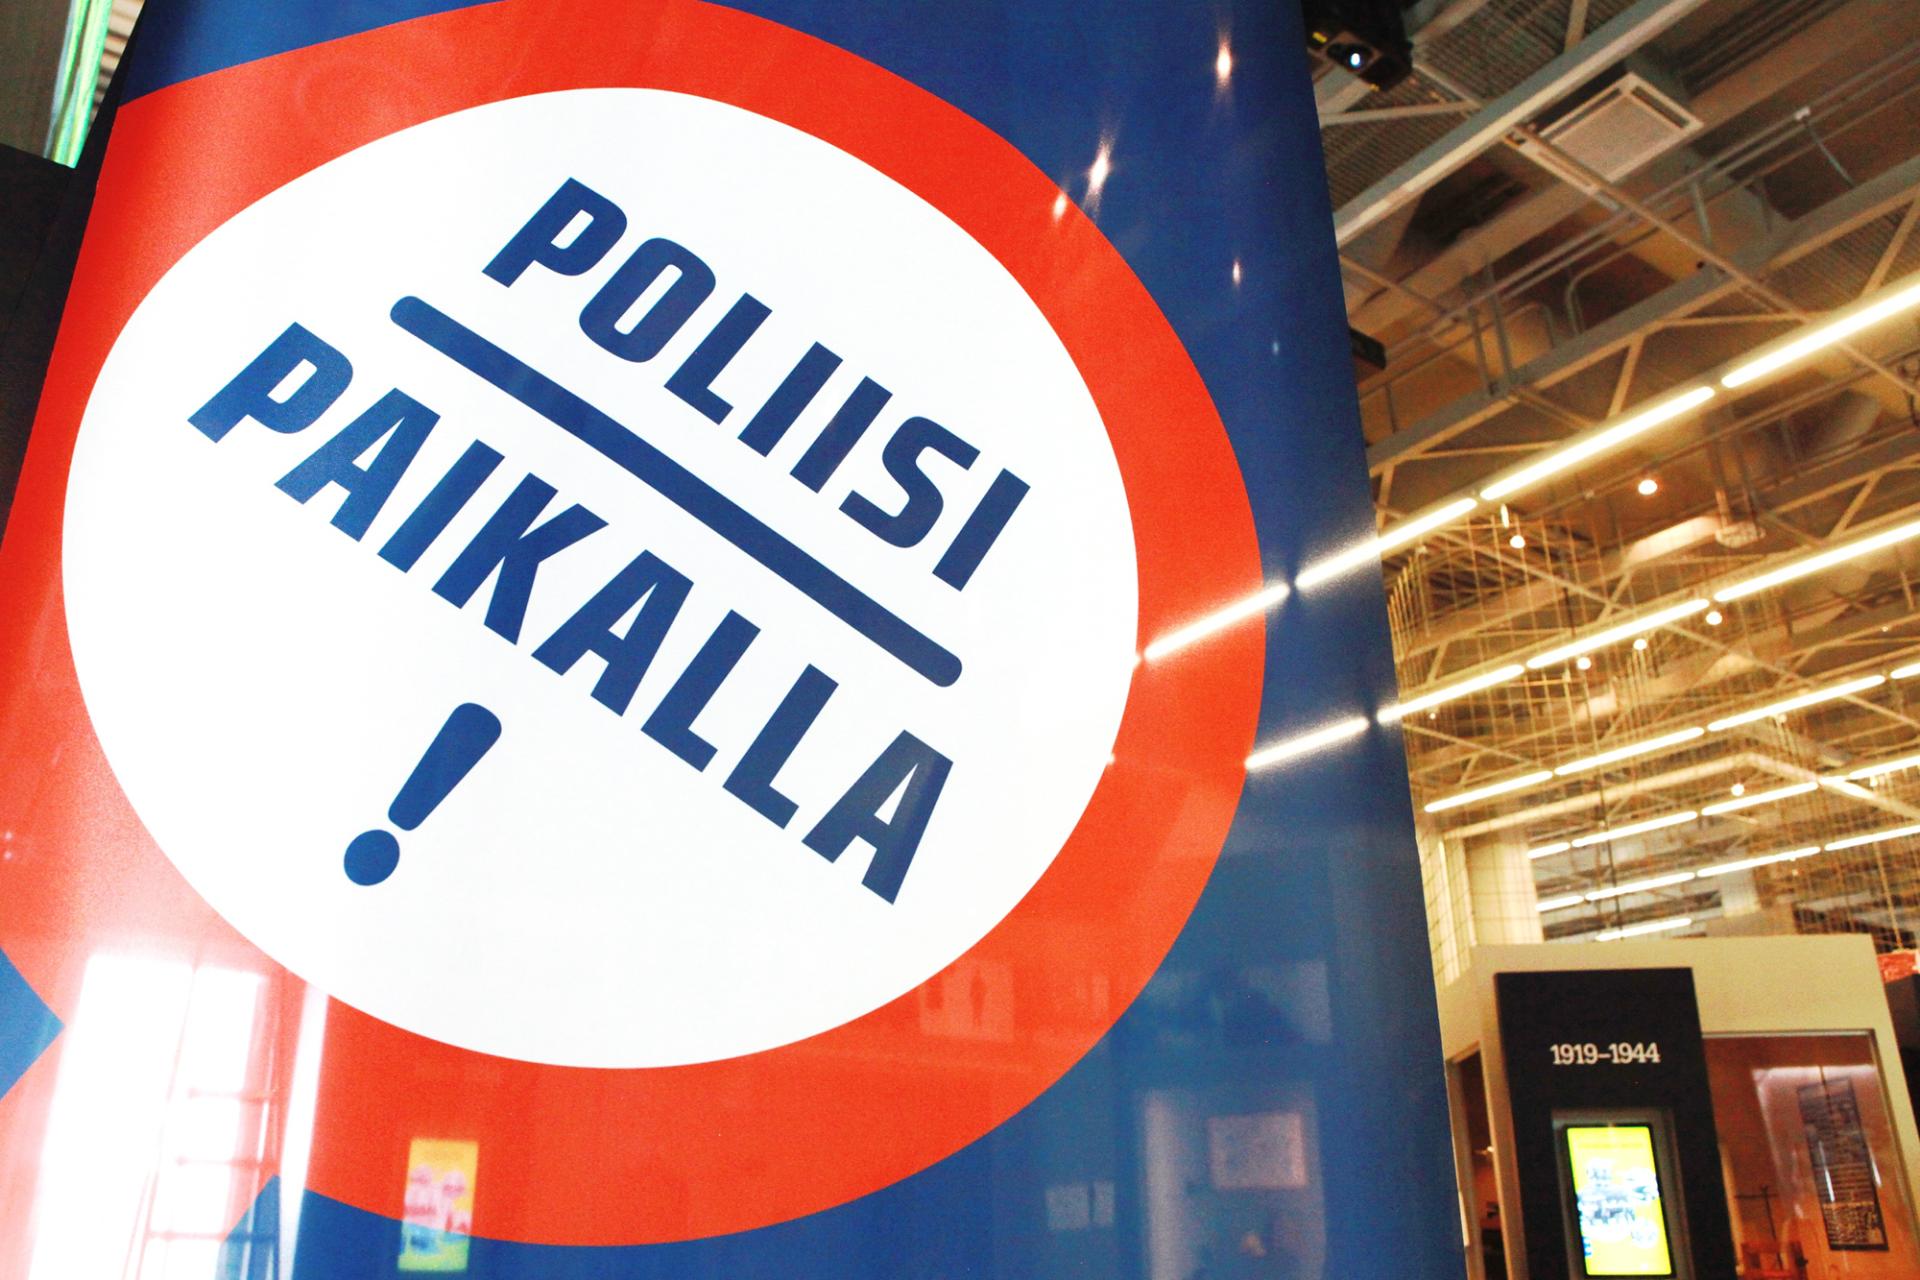 Exhibition logo in the museum facilities, with the text: Poliisi paikalla! (The Police is Here!).  